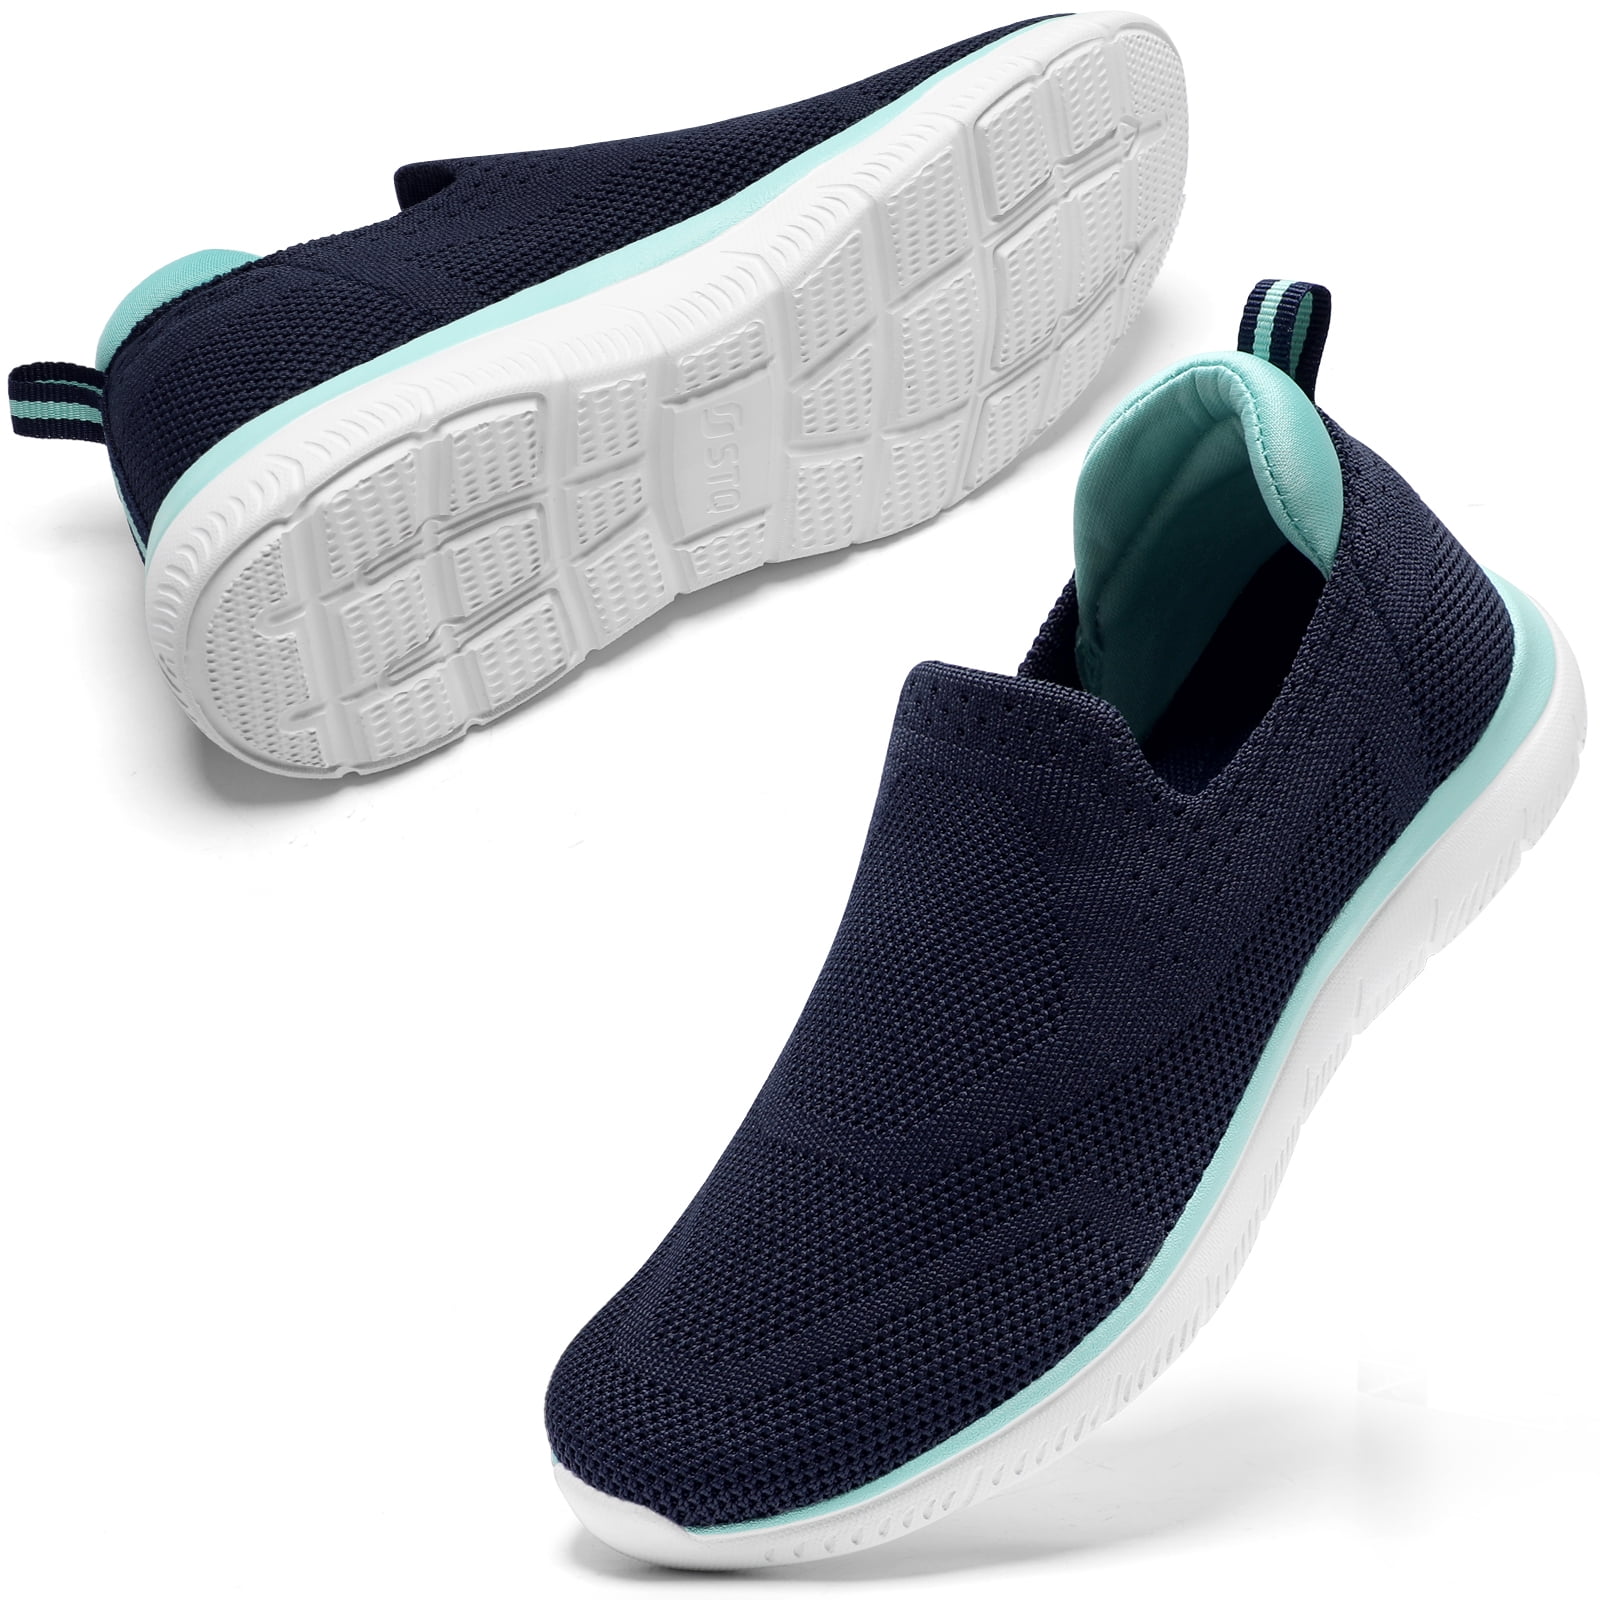 STQ Slip on Shoes for Women Breathable Walking Sneakers Navy Teal US 5. ...